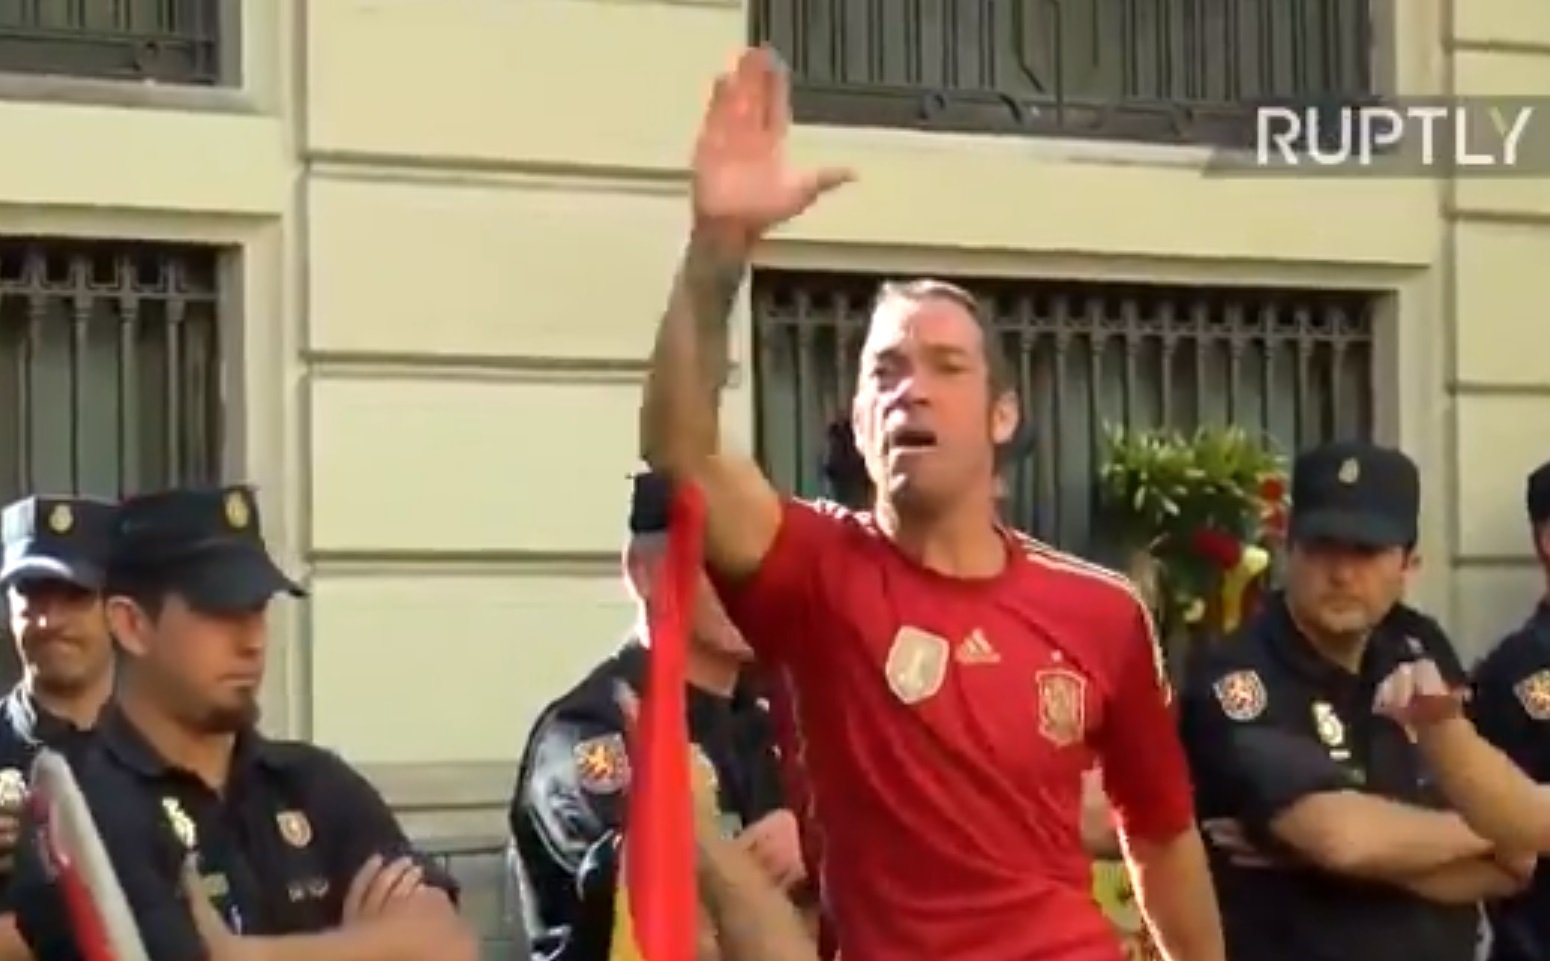 Nazi salutes before the Spanish police